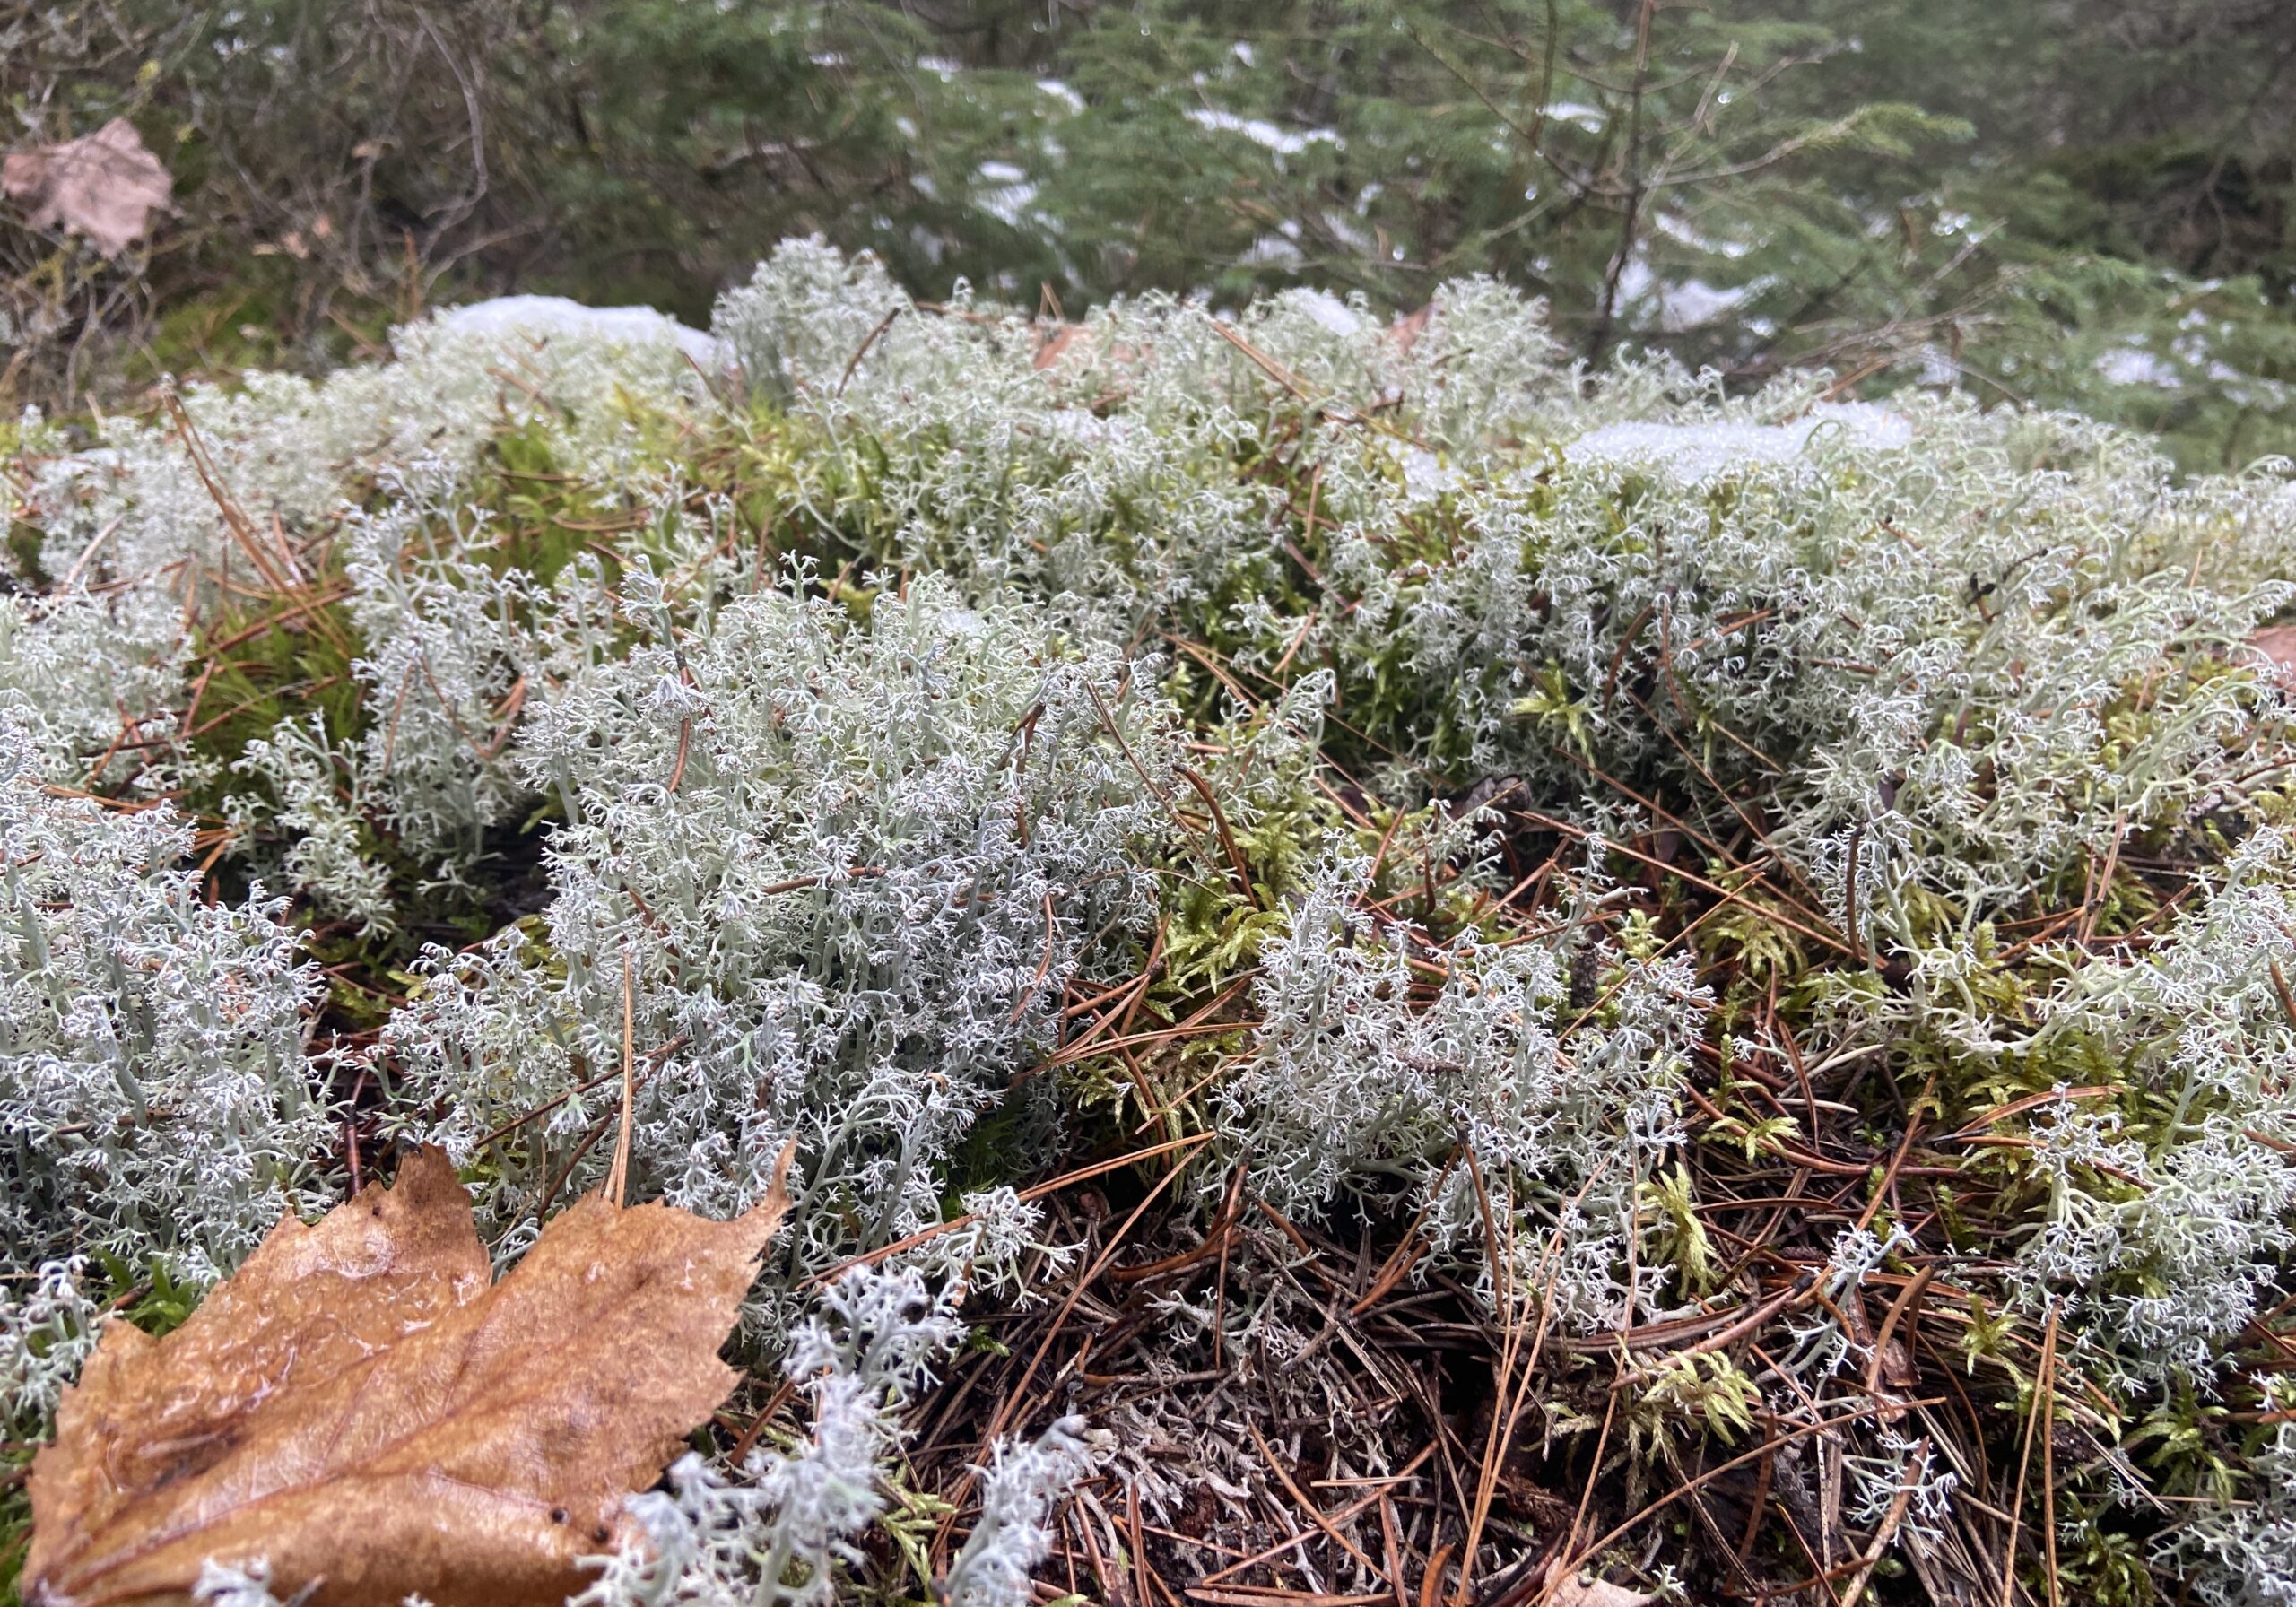 Moss, lichen, and a bit of snow on the forest floor